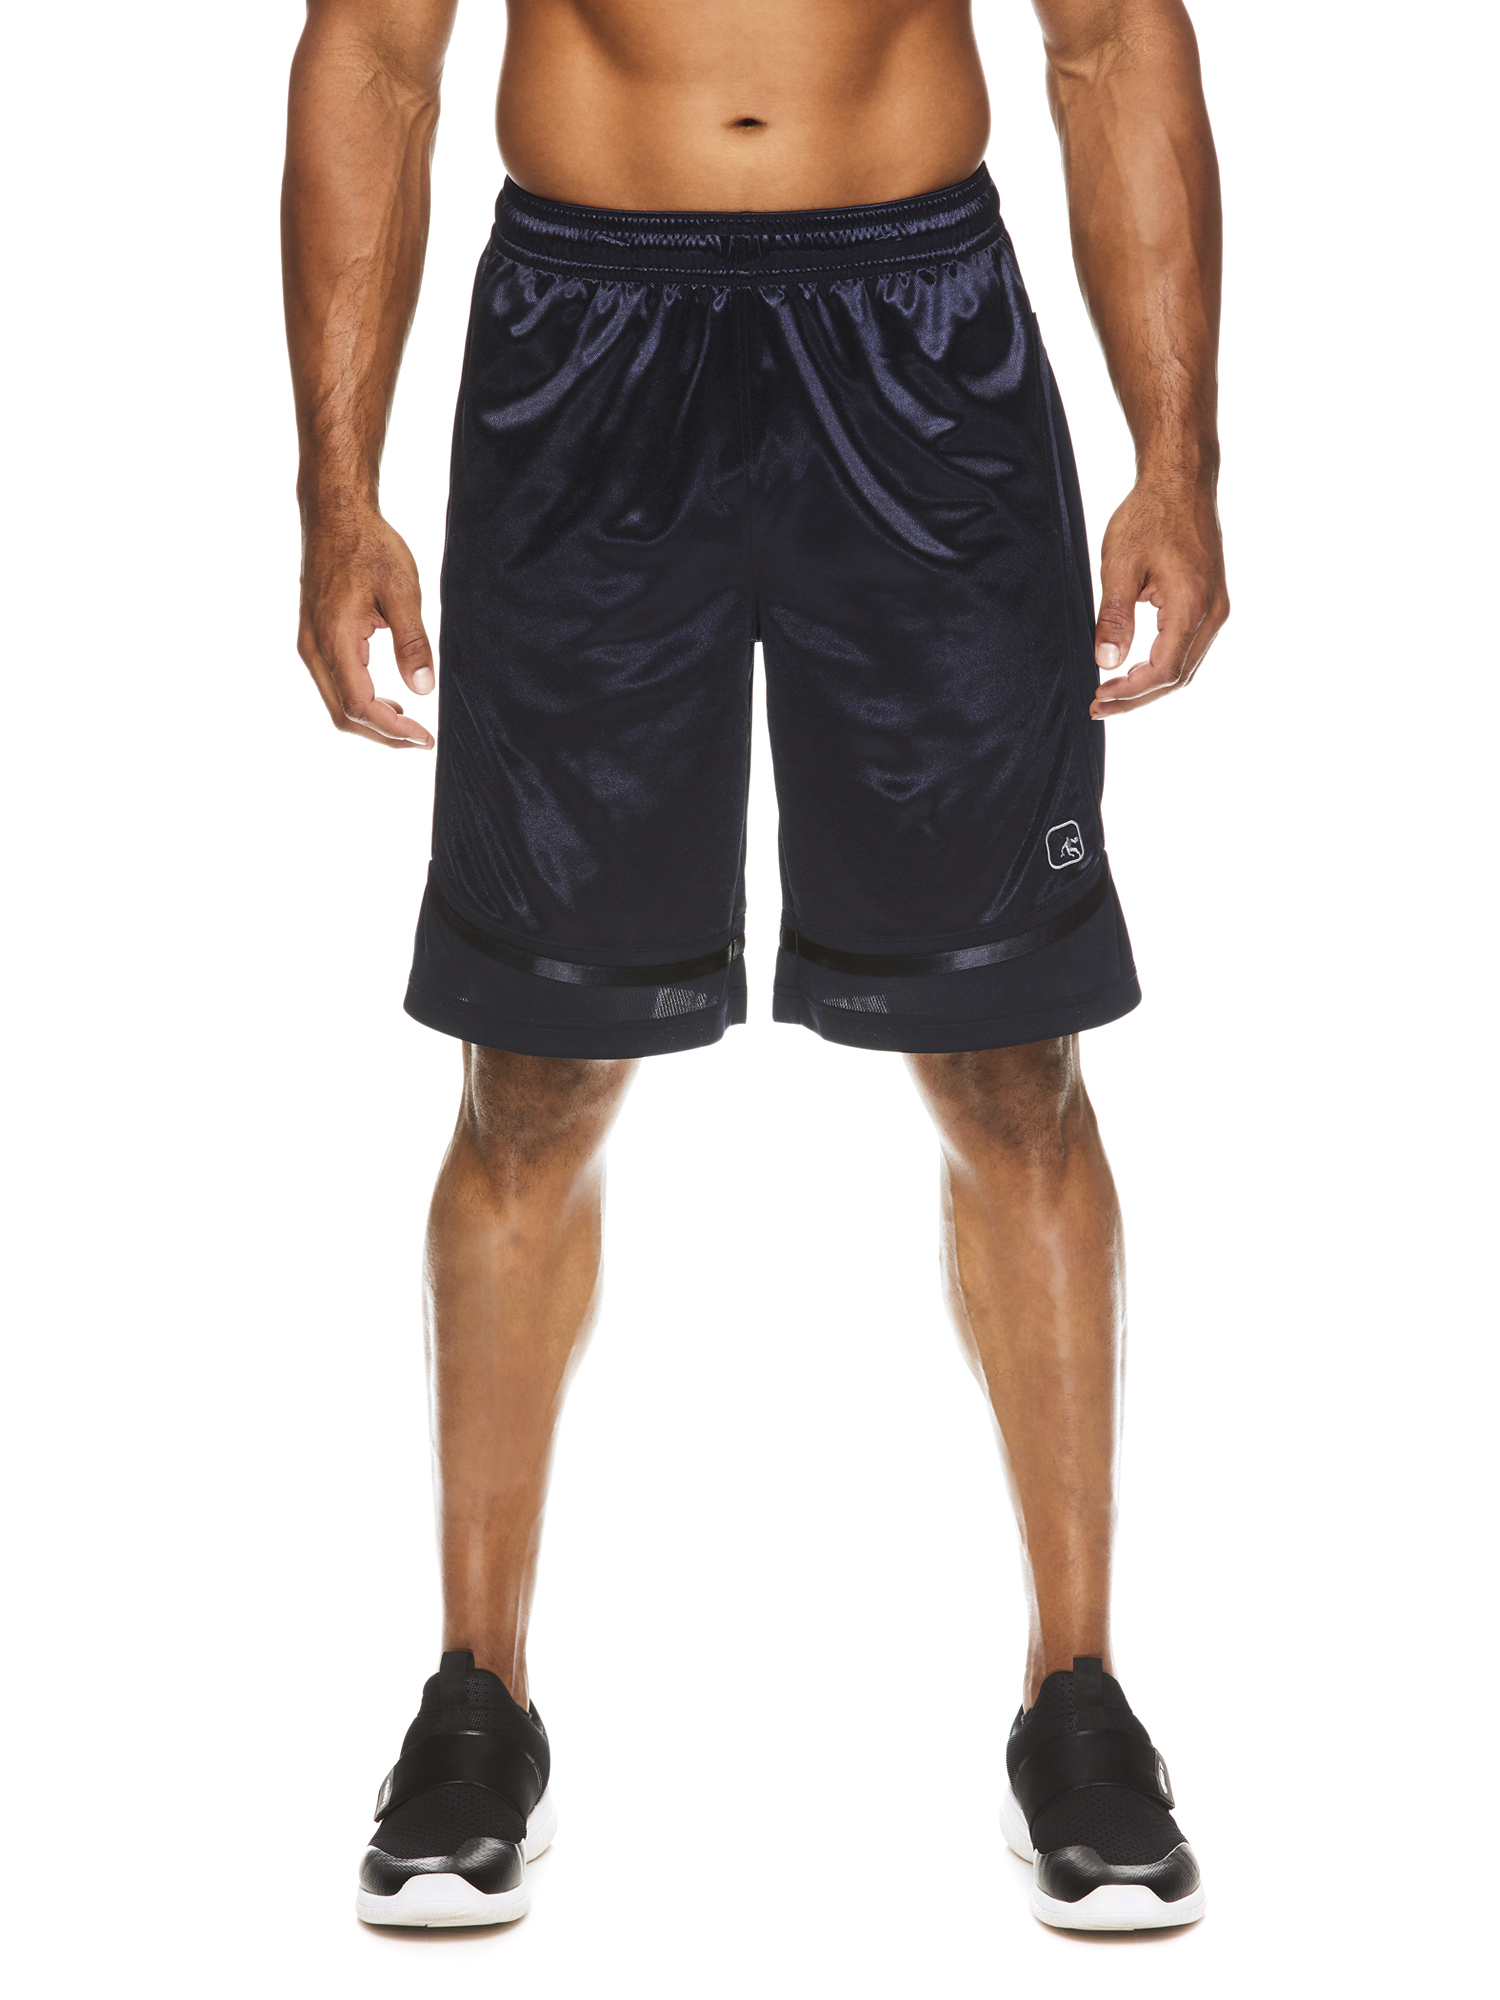 AND1 Men's and Big Men's Active Core 11" Home Court Basketball Shorts, Sizes S-5XL - image 1 of 5